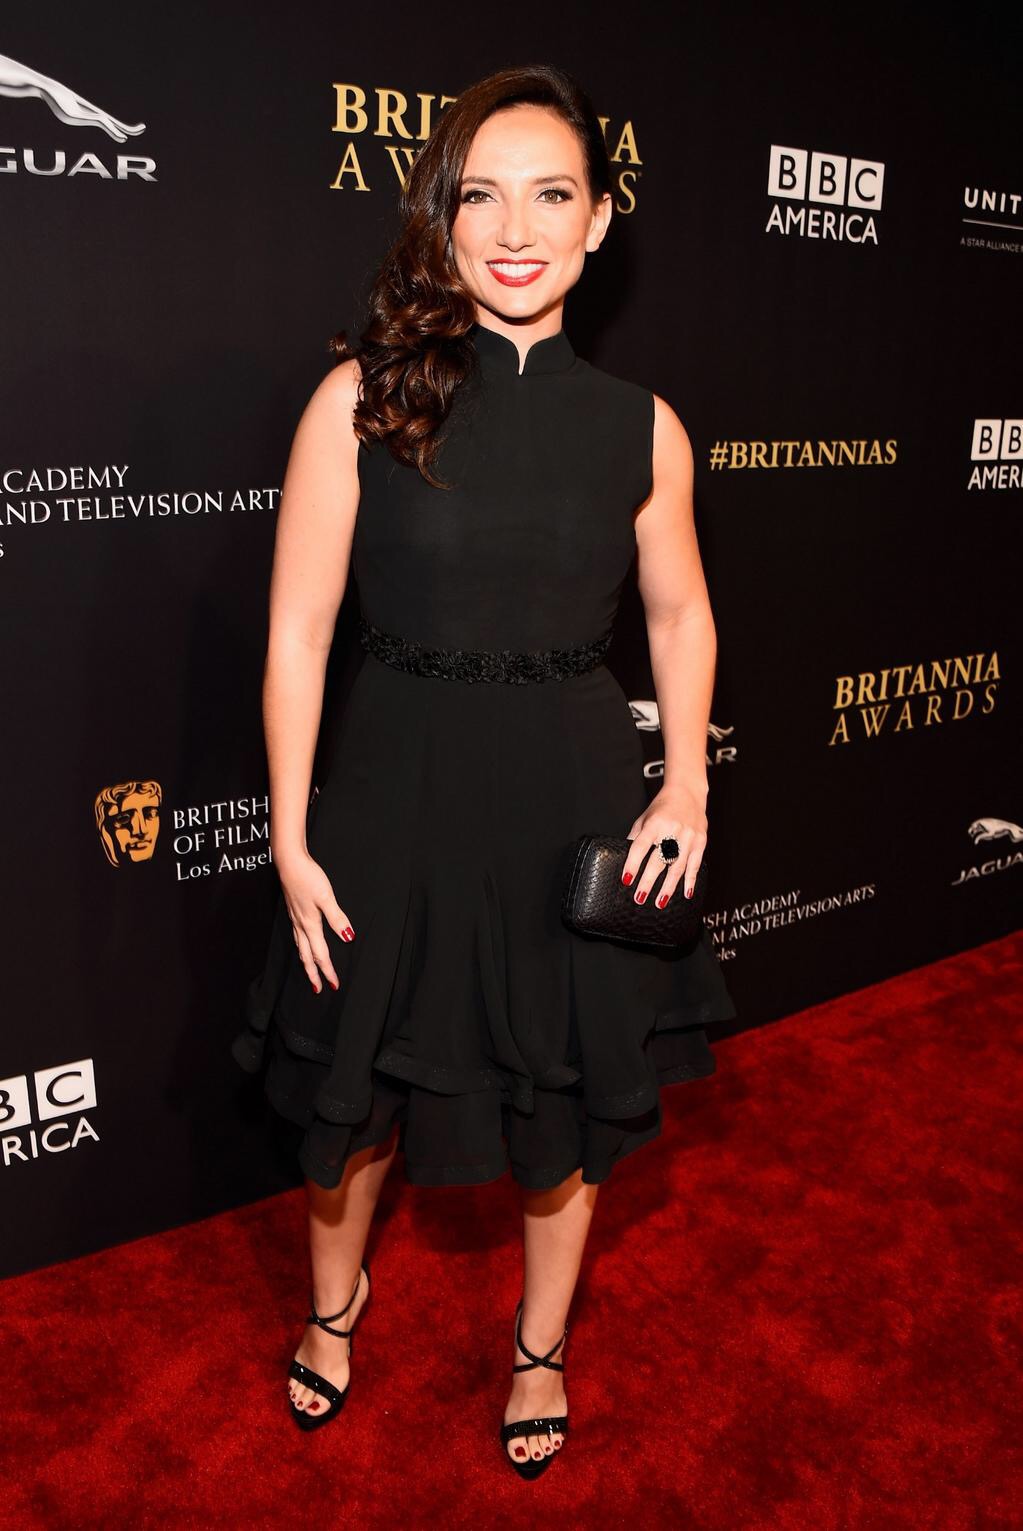 Actress Leila Birch attends the BAFTA Los Angeles Jaguar Britannia Awards presented by BBC America and United Airlines at The Beverly Hilton Hotel on October 30, 2014 in Beverly Hills, California.